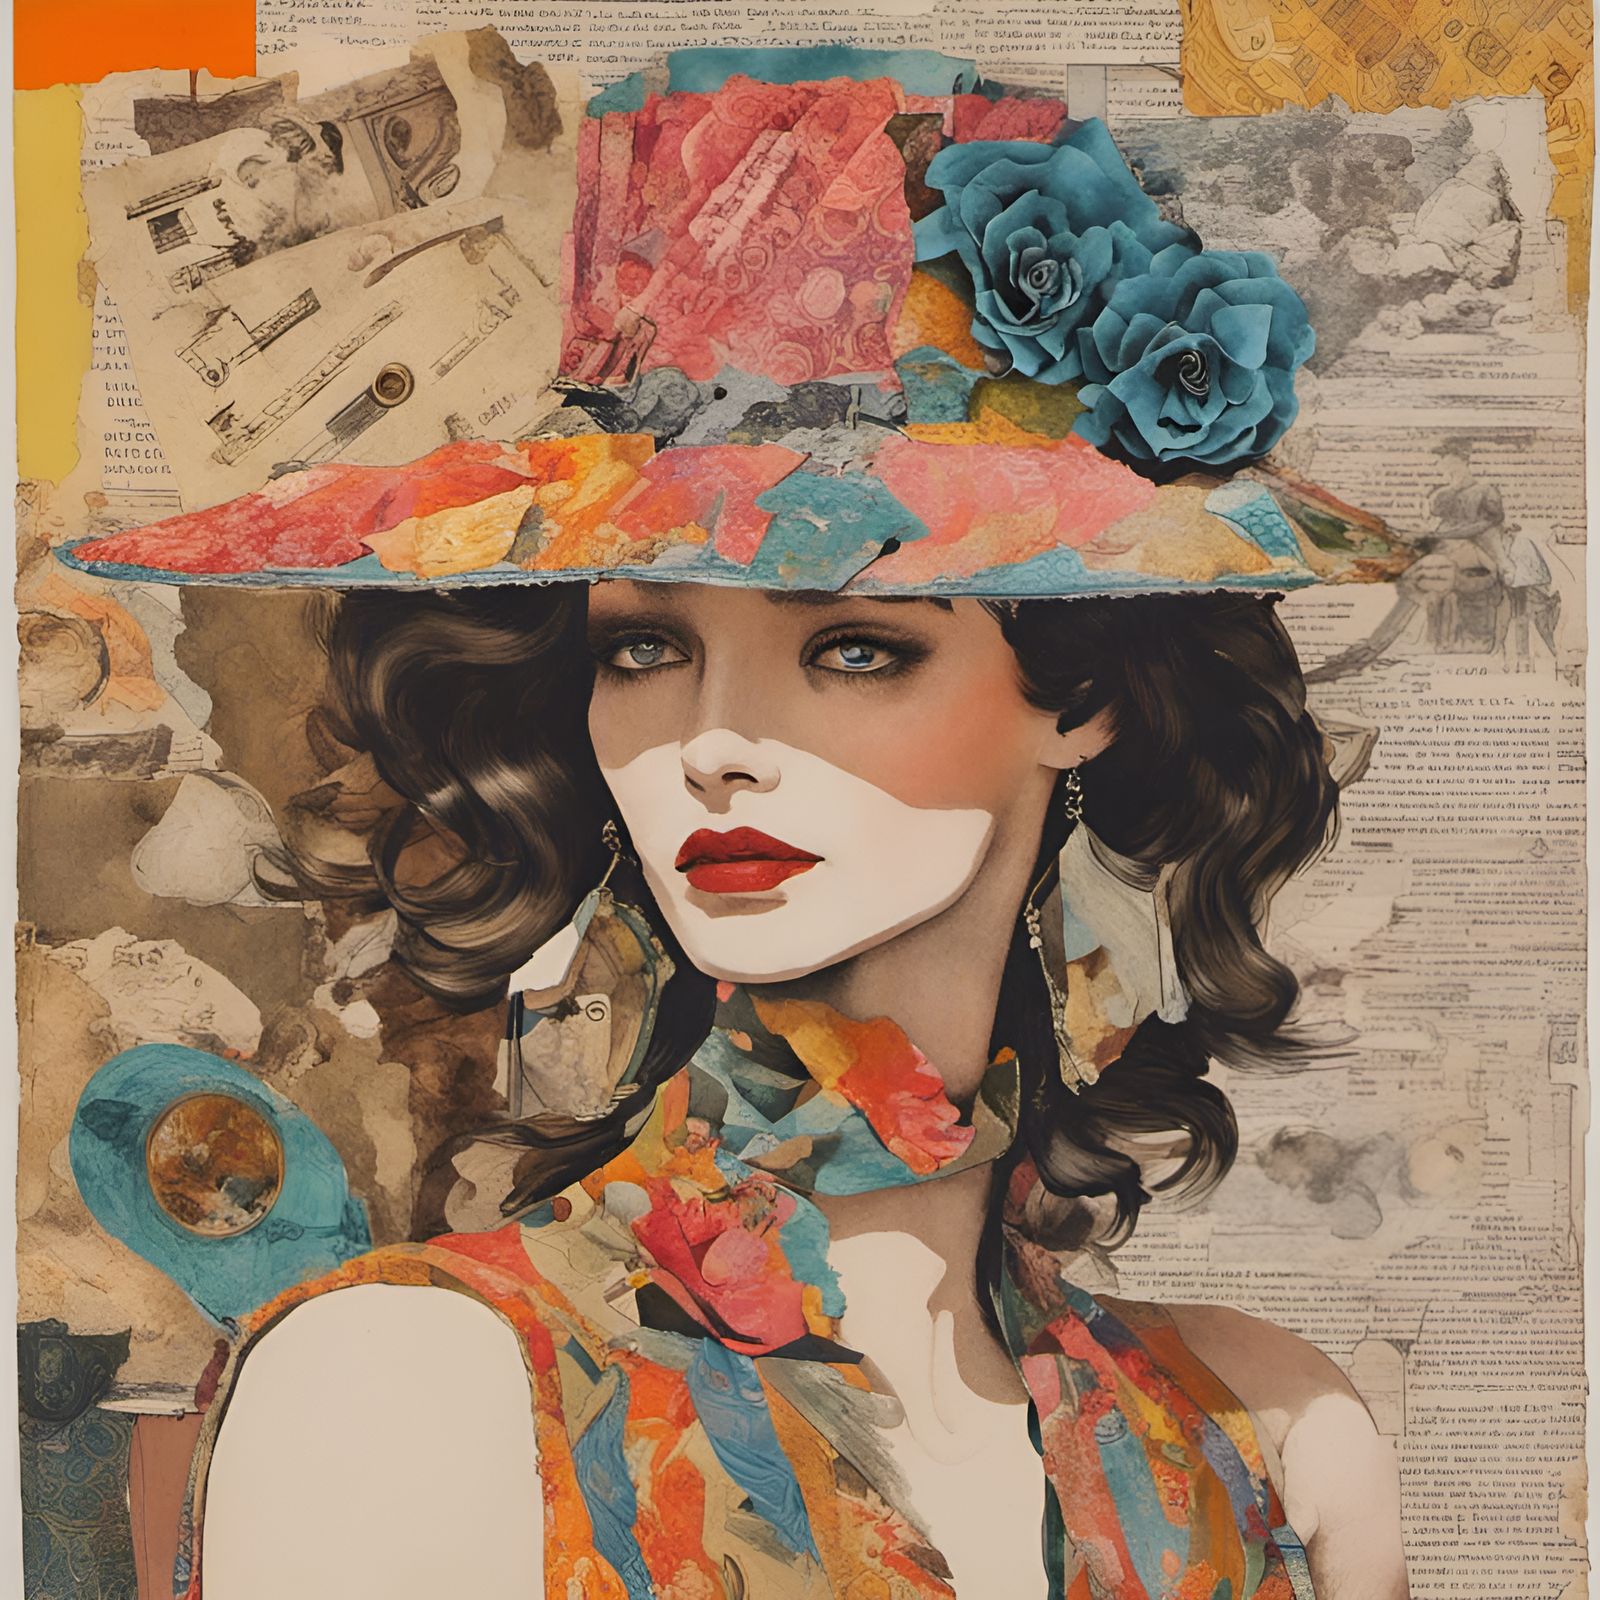 1970s meets 1990s fashion illustration colorful 3D collage